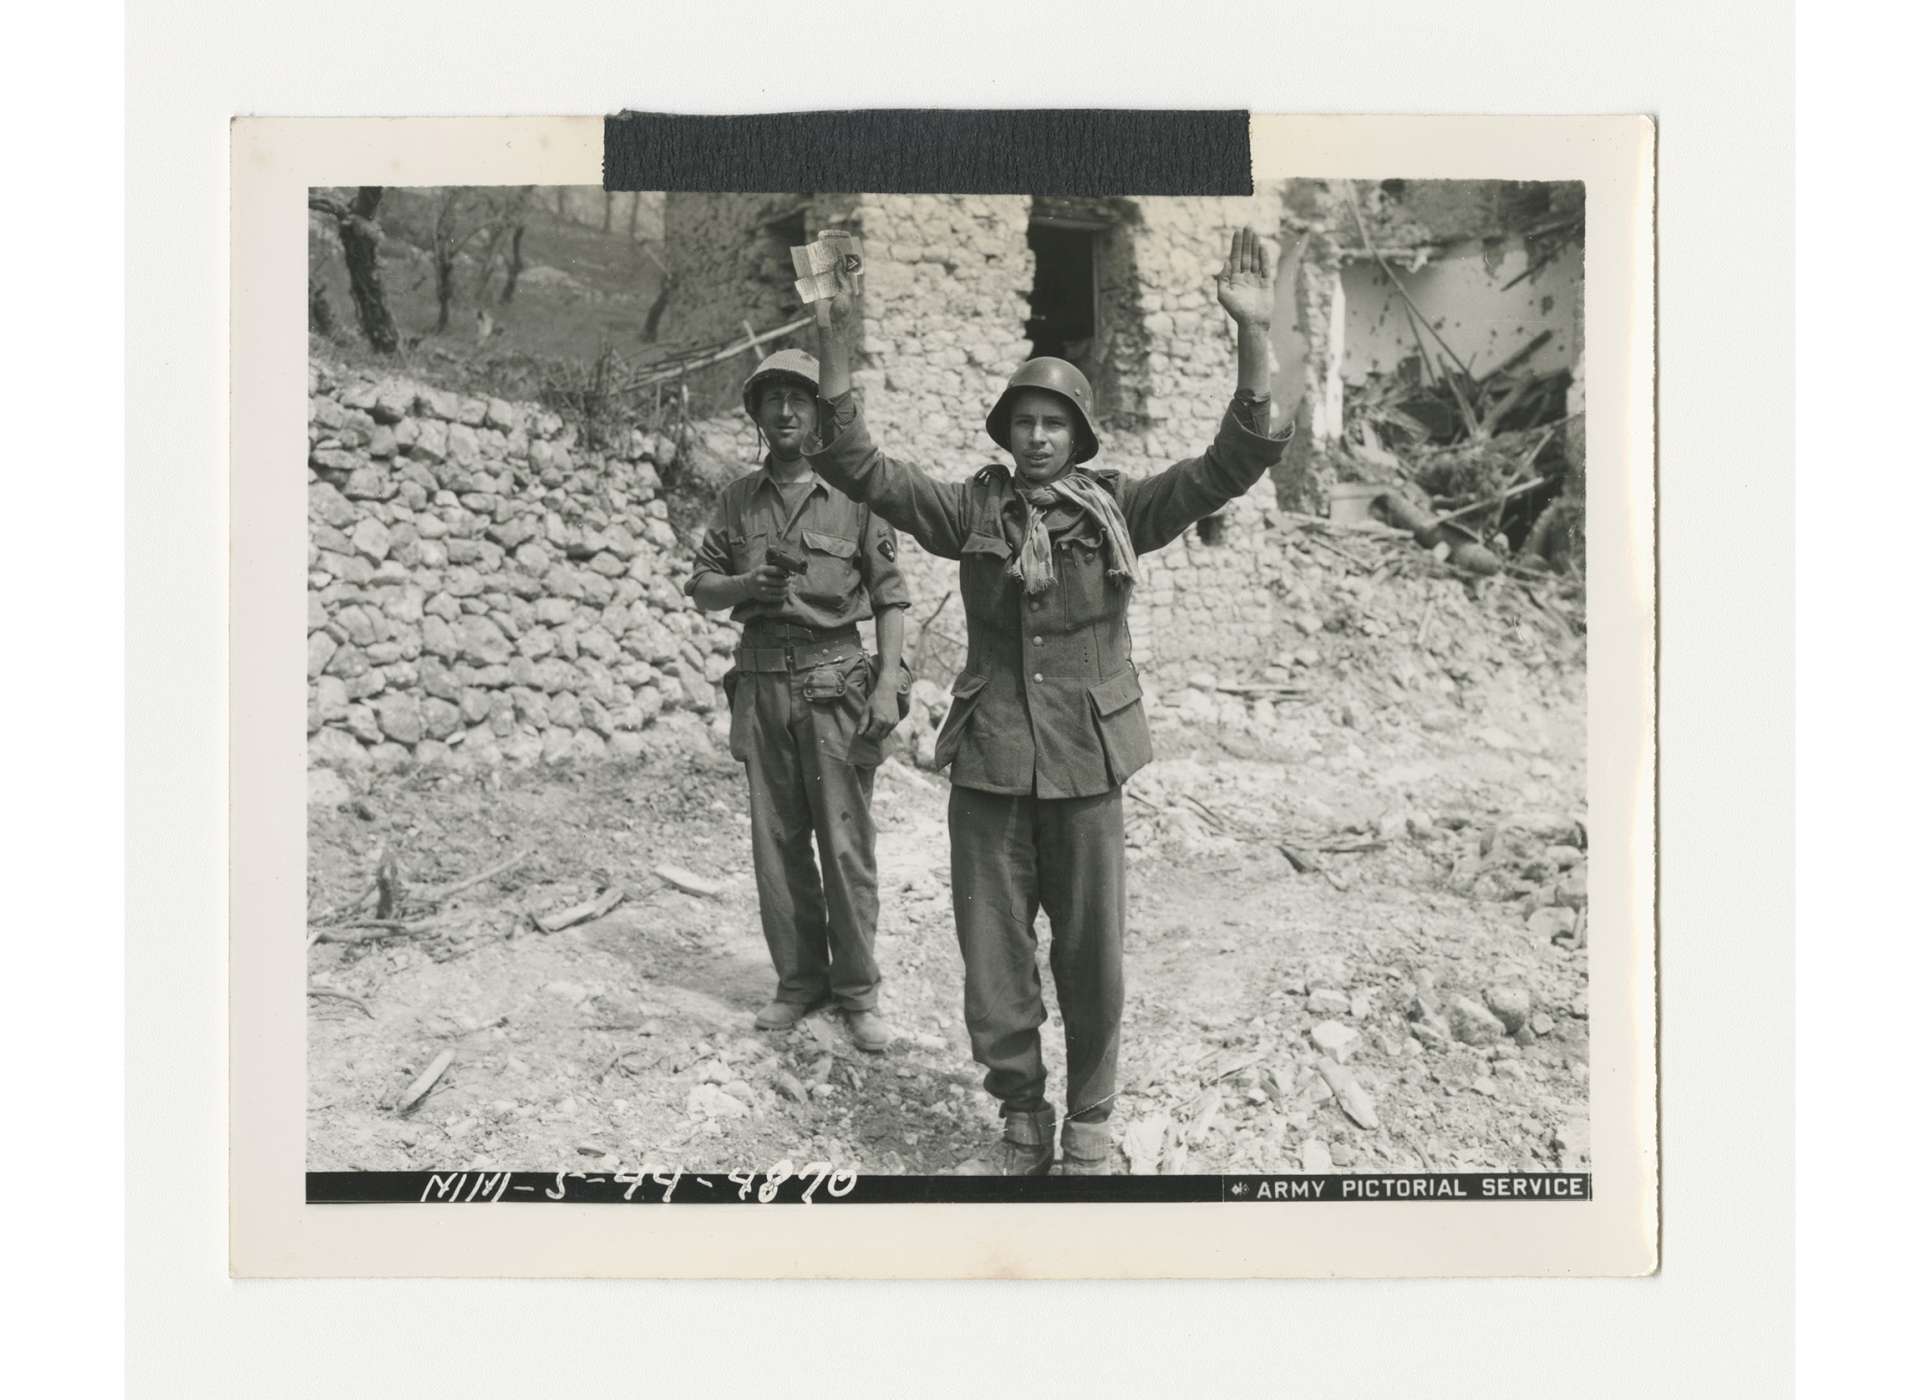 Moroccan soldier, part of Free French forces, guards a German prisoner of war in the Castelforte area, May 15, 1944. US Army Signal Corps photo, gift of Ms. Regan Forrester, from the Collection of The National WWII Museum, 2002.337.187.